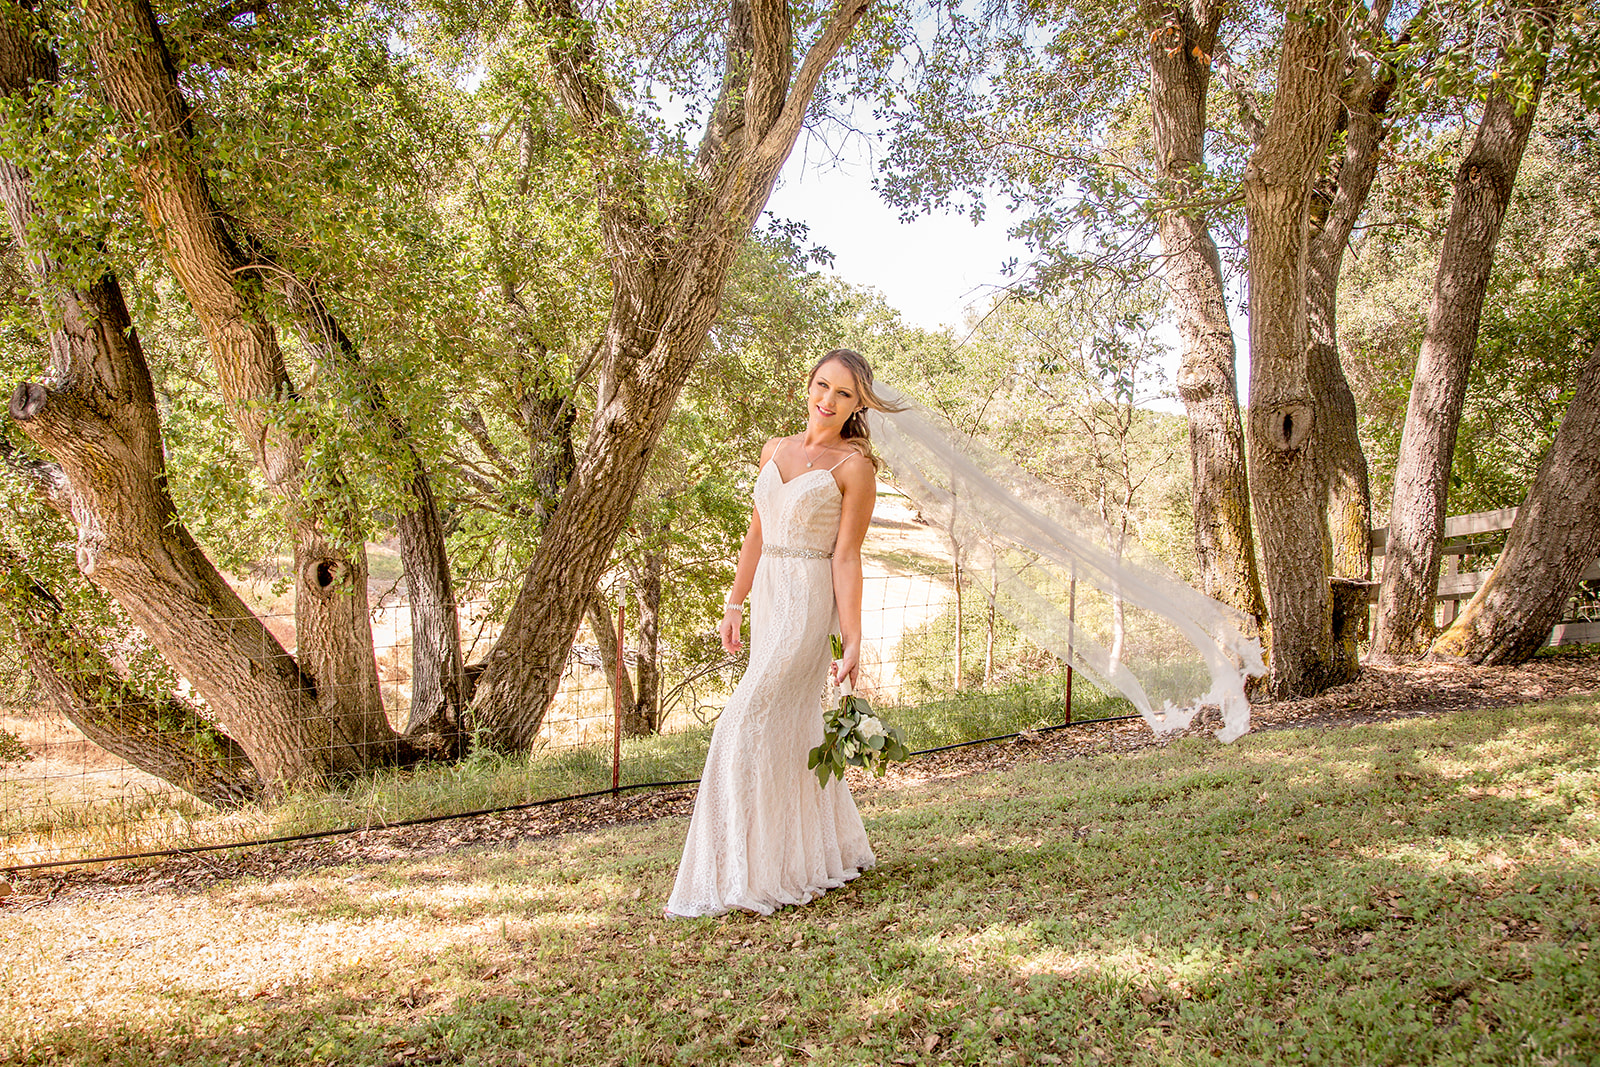 Bridal portrait at intimate wedding on the Central Coast of California.